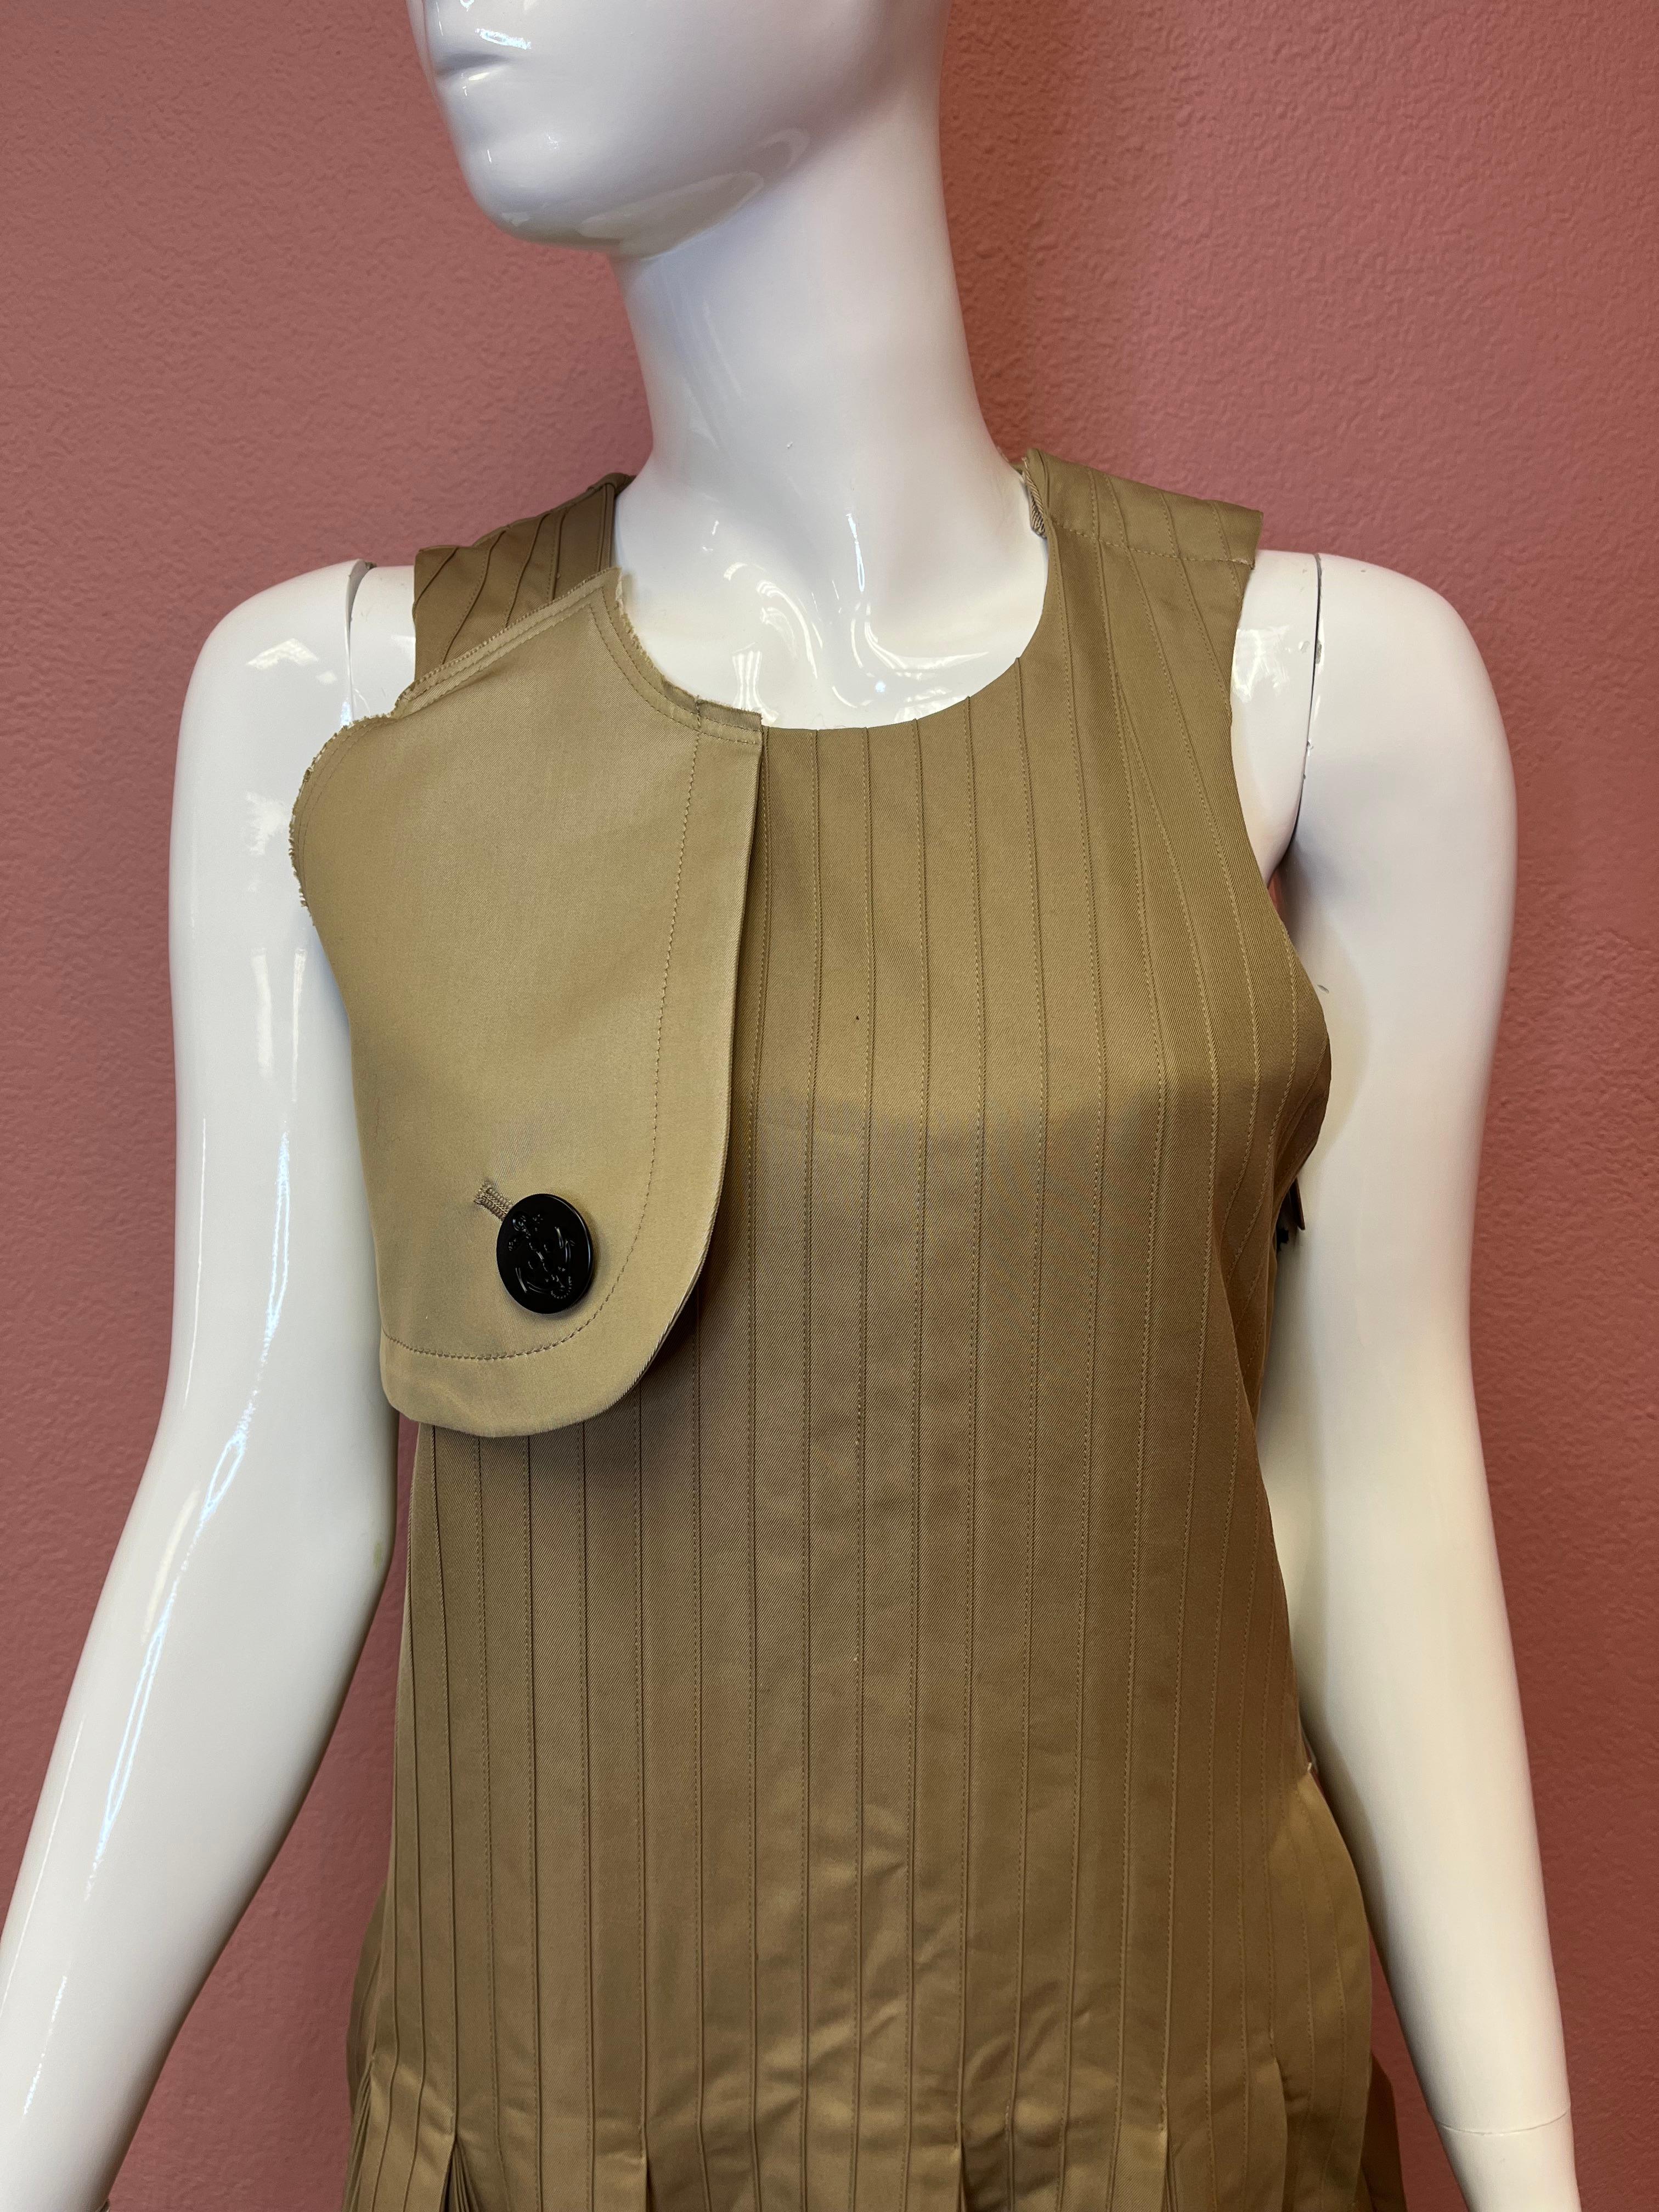 Brand New Sacai dress. Camel / Nude in color, sleeveless with a drop waist and flaring at the bottom. This is a super flattering style and cut. Perfect for any day outings, where you want to look conservative yet very chic. 

Tags still attached -